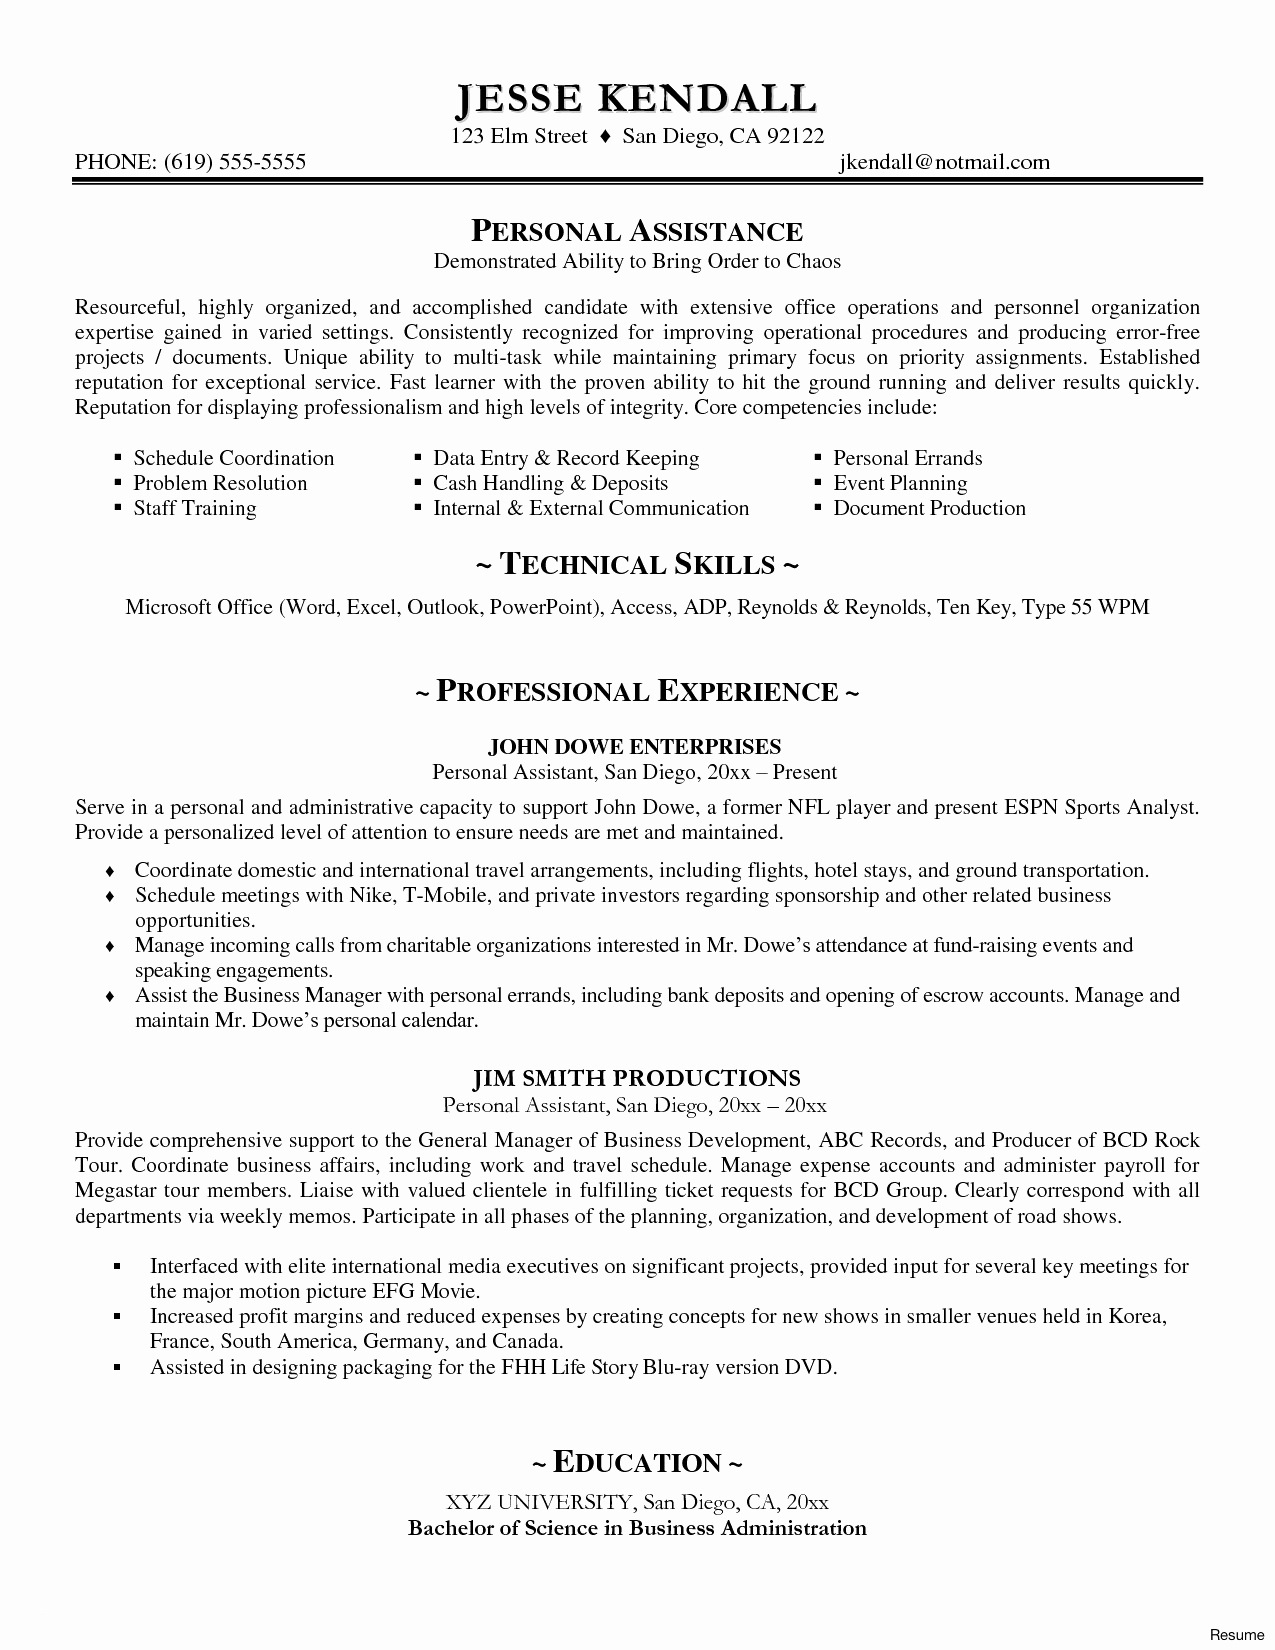 Business Cover Letter Template Word - Resume Cover Letter Template Word Best Accounts Executive Resume